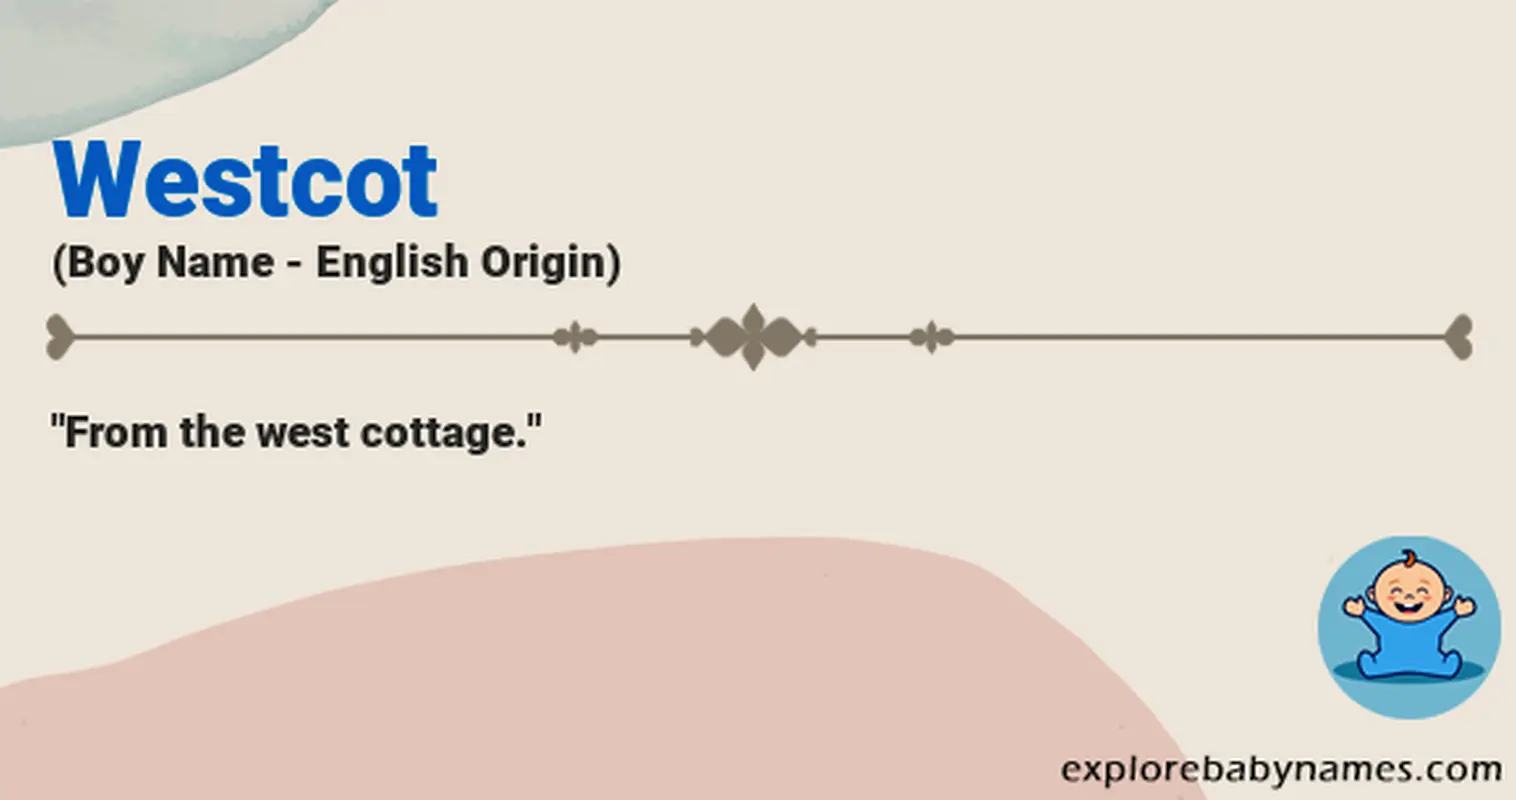 Meaning of Westcot